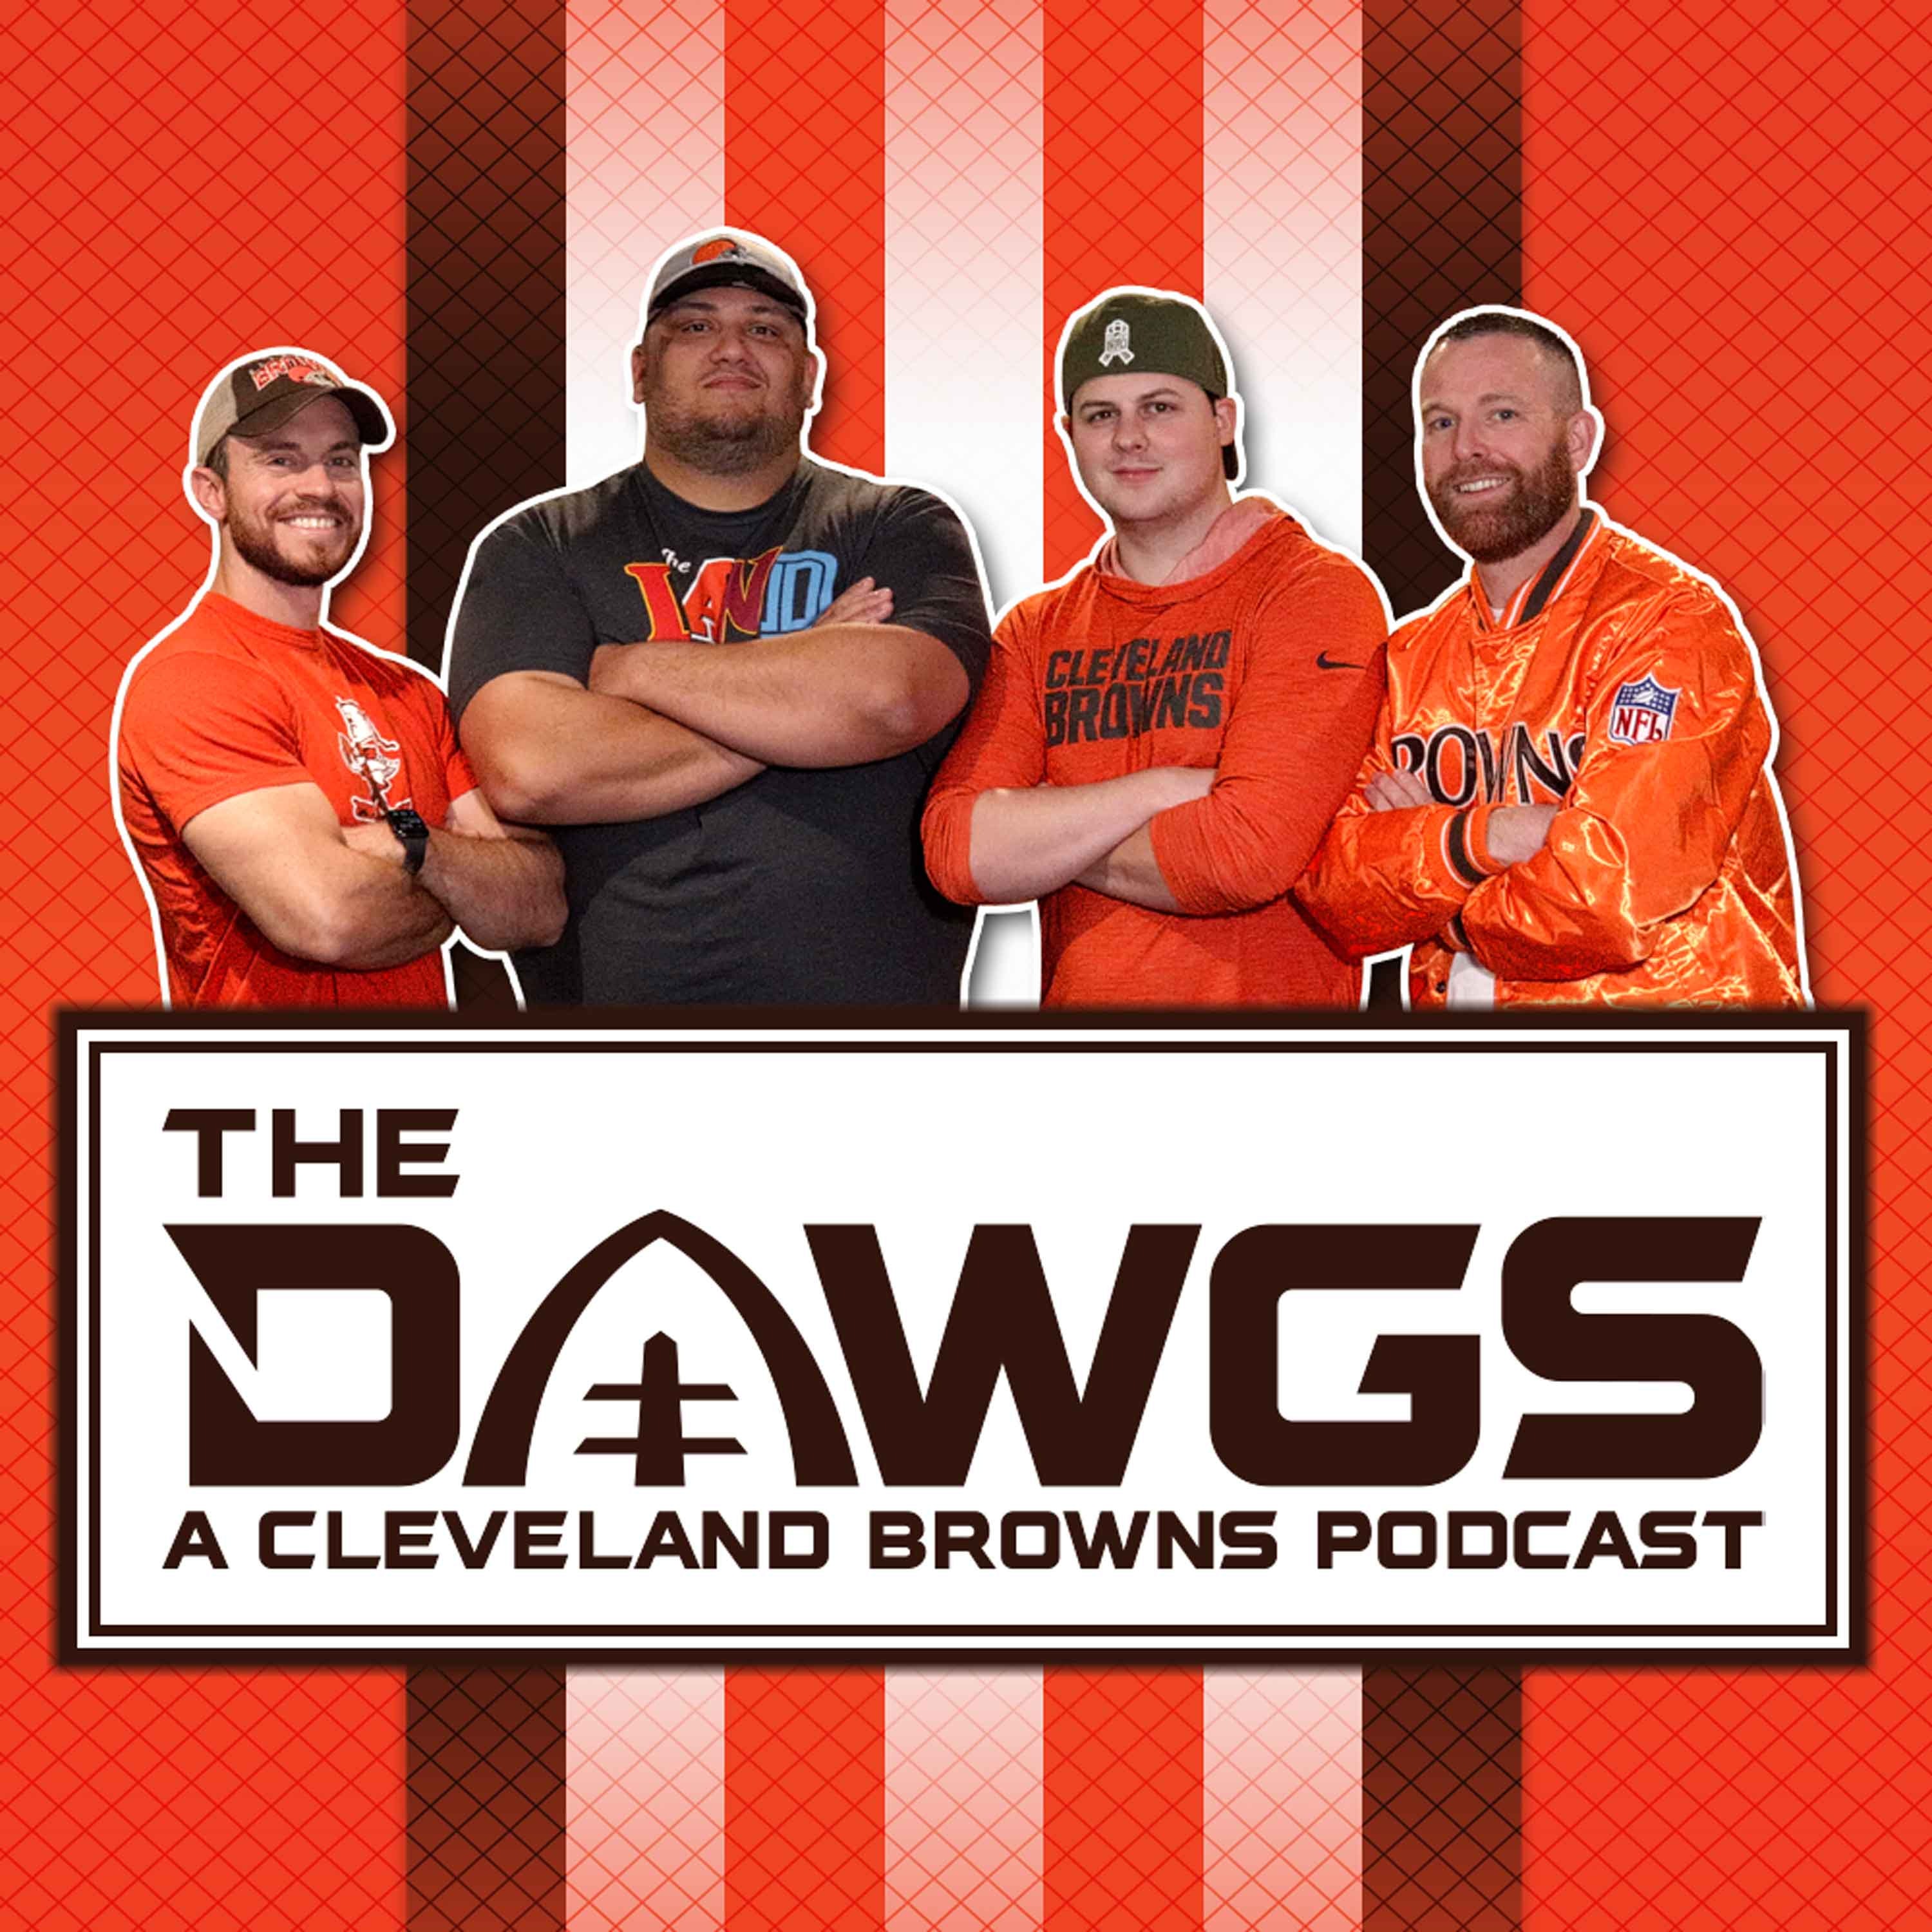 Week 1 Preview - Cleveland Browns at Carolina Panthers  | The Dawgs - A Cleveland Browns Podcast - September 7, 2022